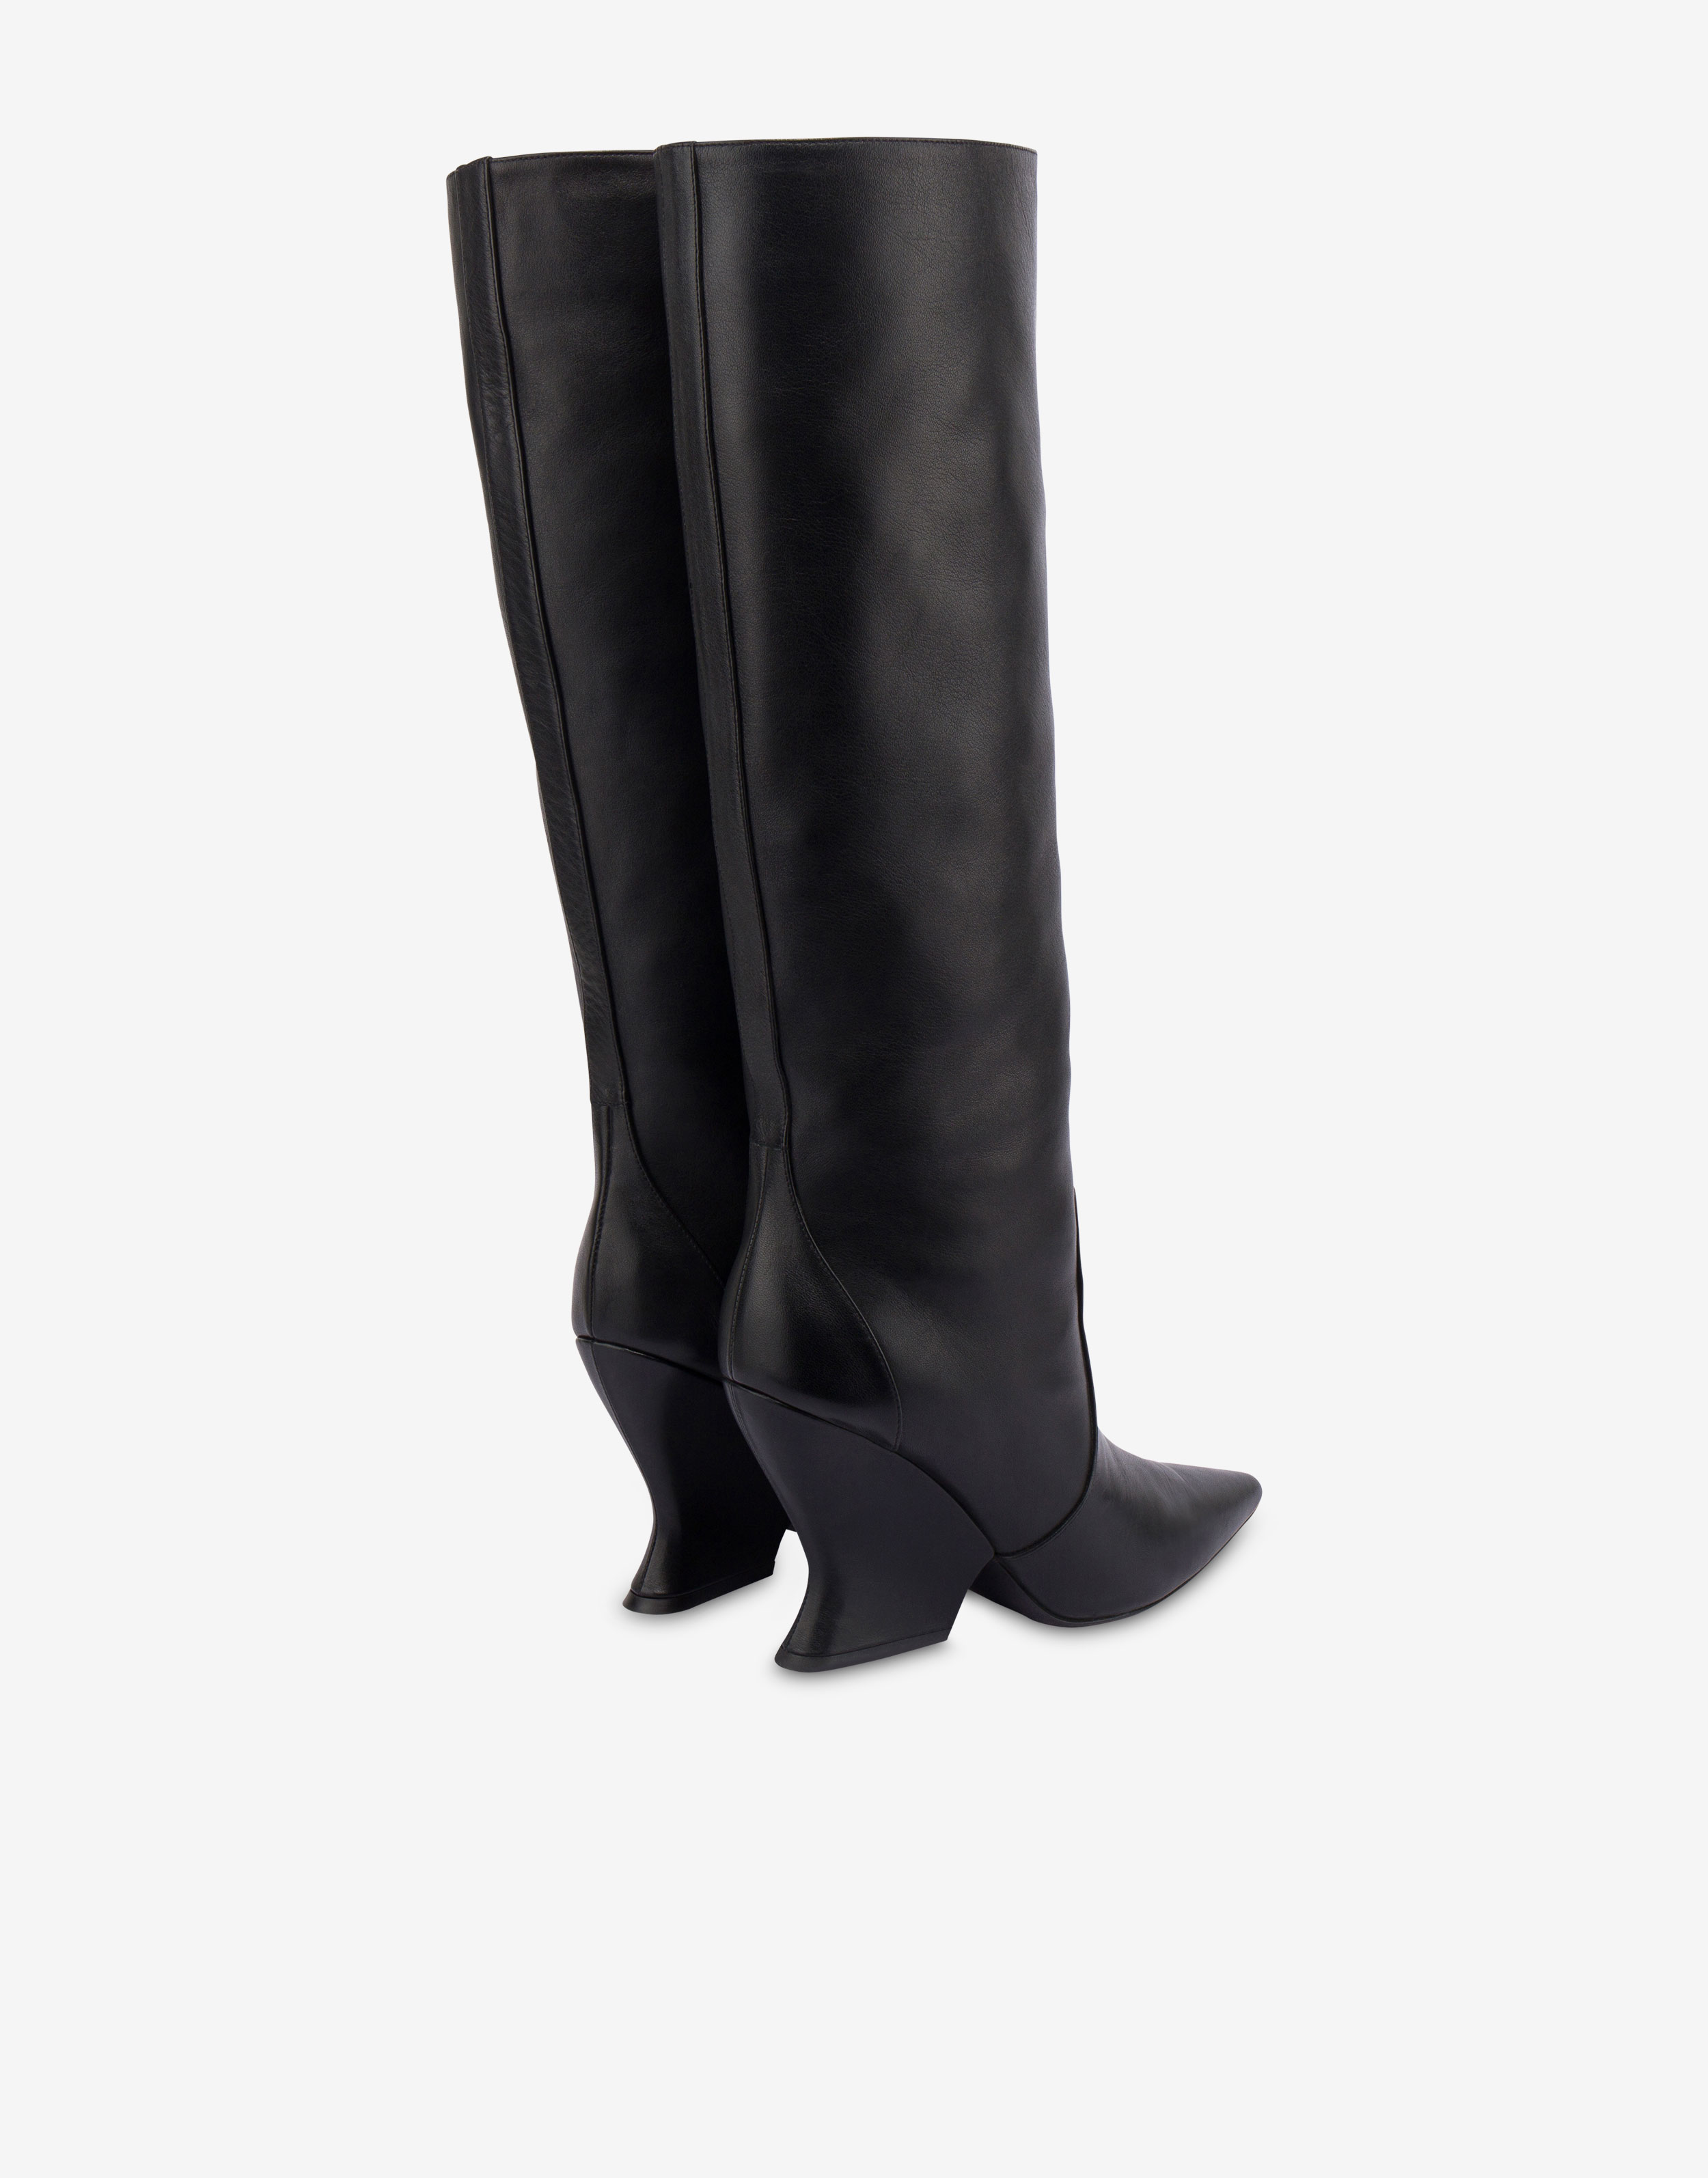 Walking calf leather boots